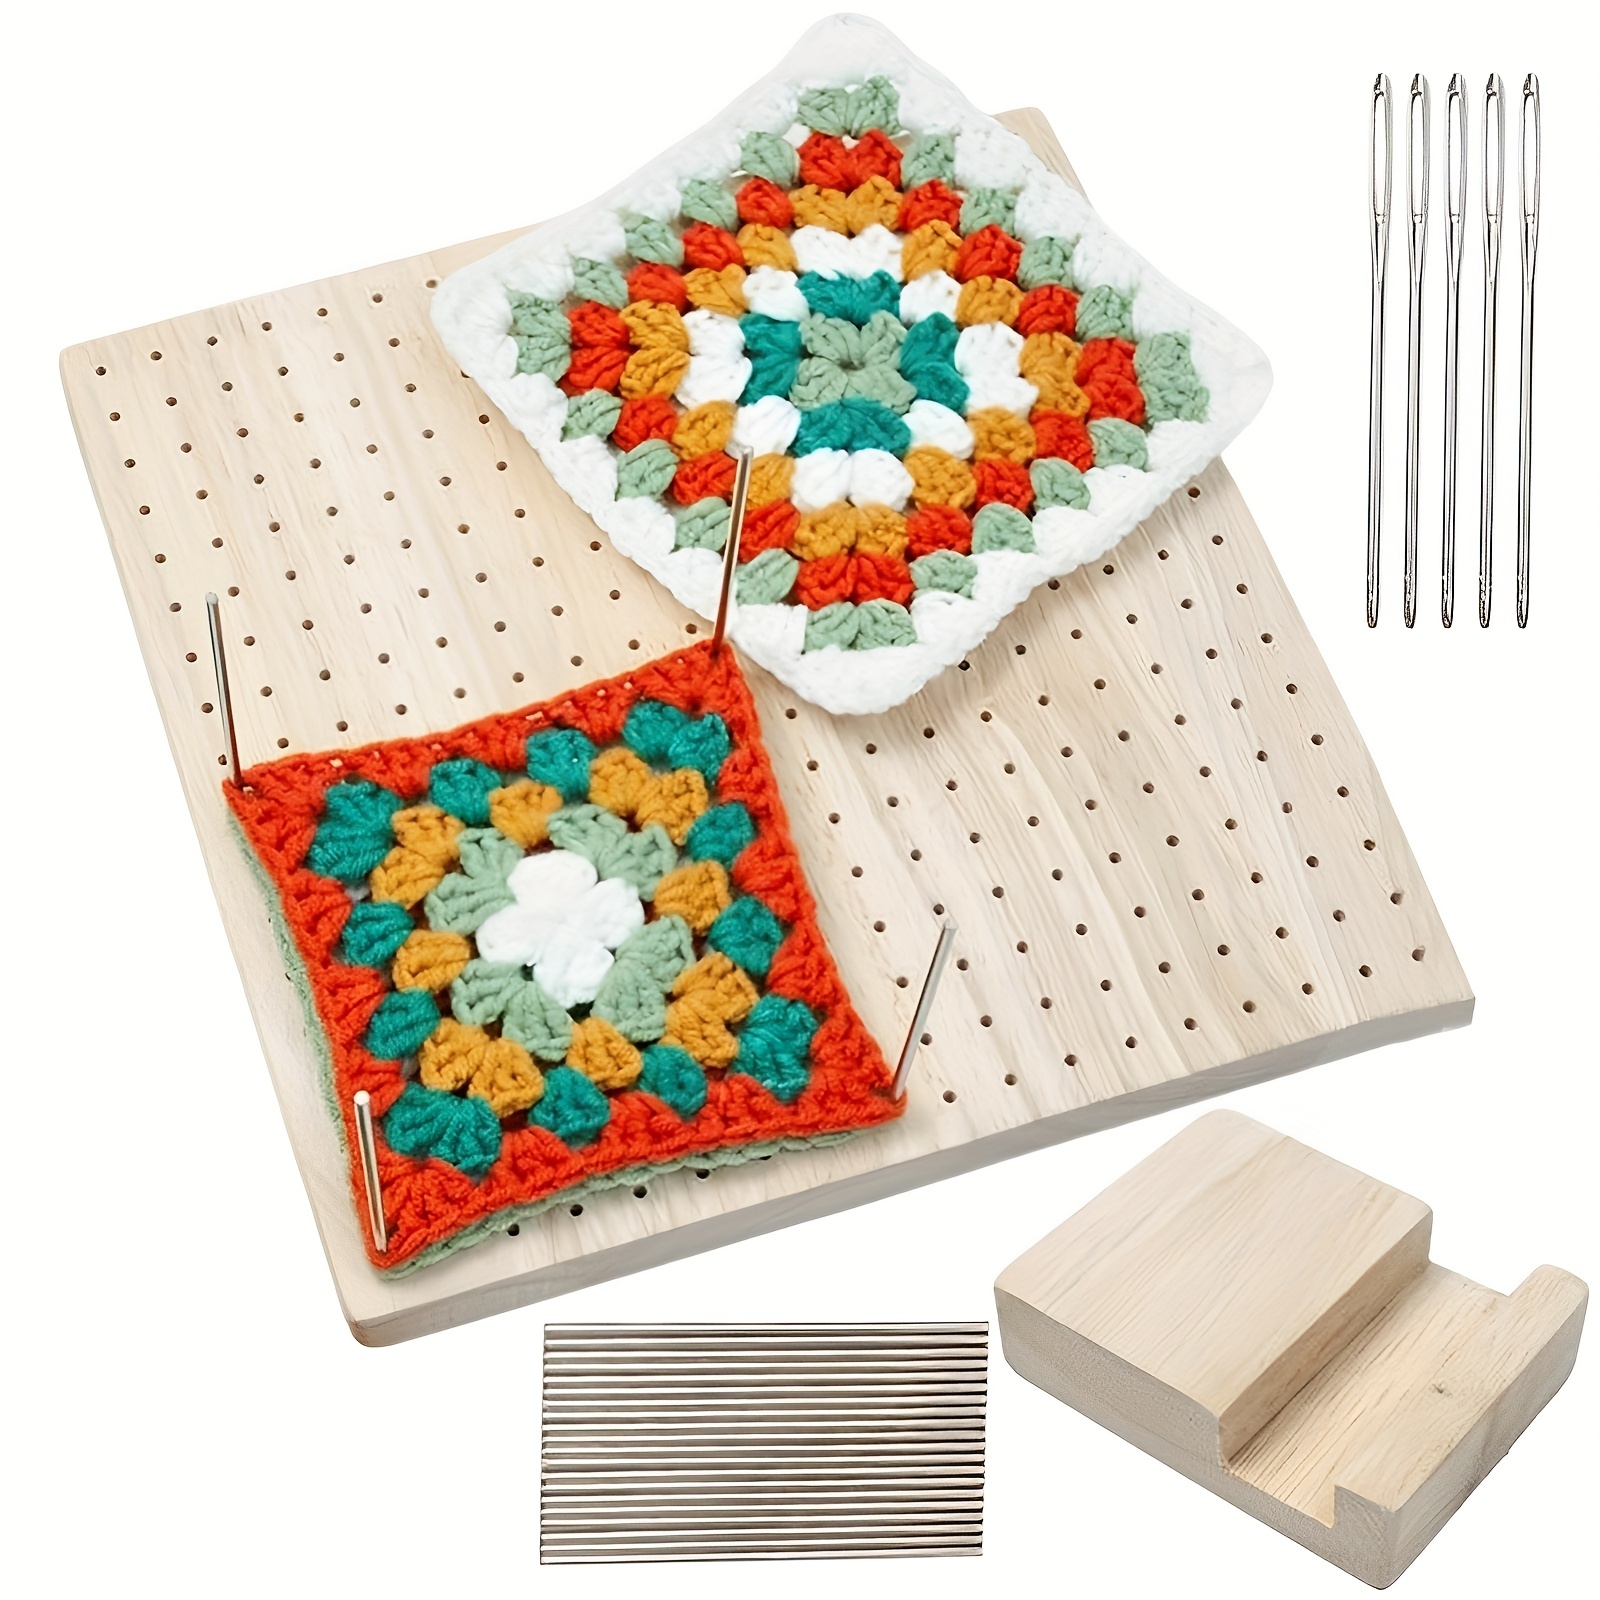 LIVSMON 9x9Inch Crochet Blocking Board with 20 Pins, Handcrafted Knitting  Blocking Mat for Knitting Crochet, Full Kit with 20 Stainless Steel Rod